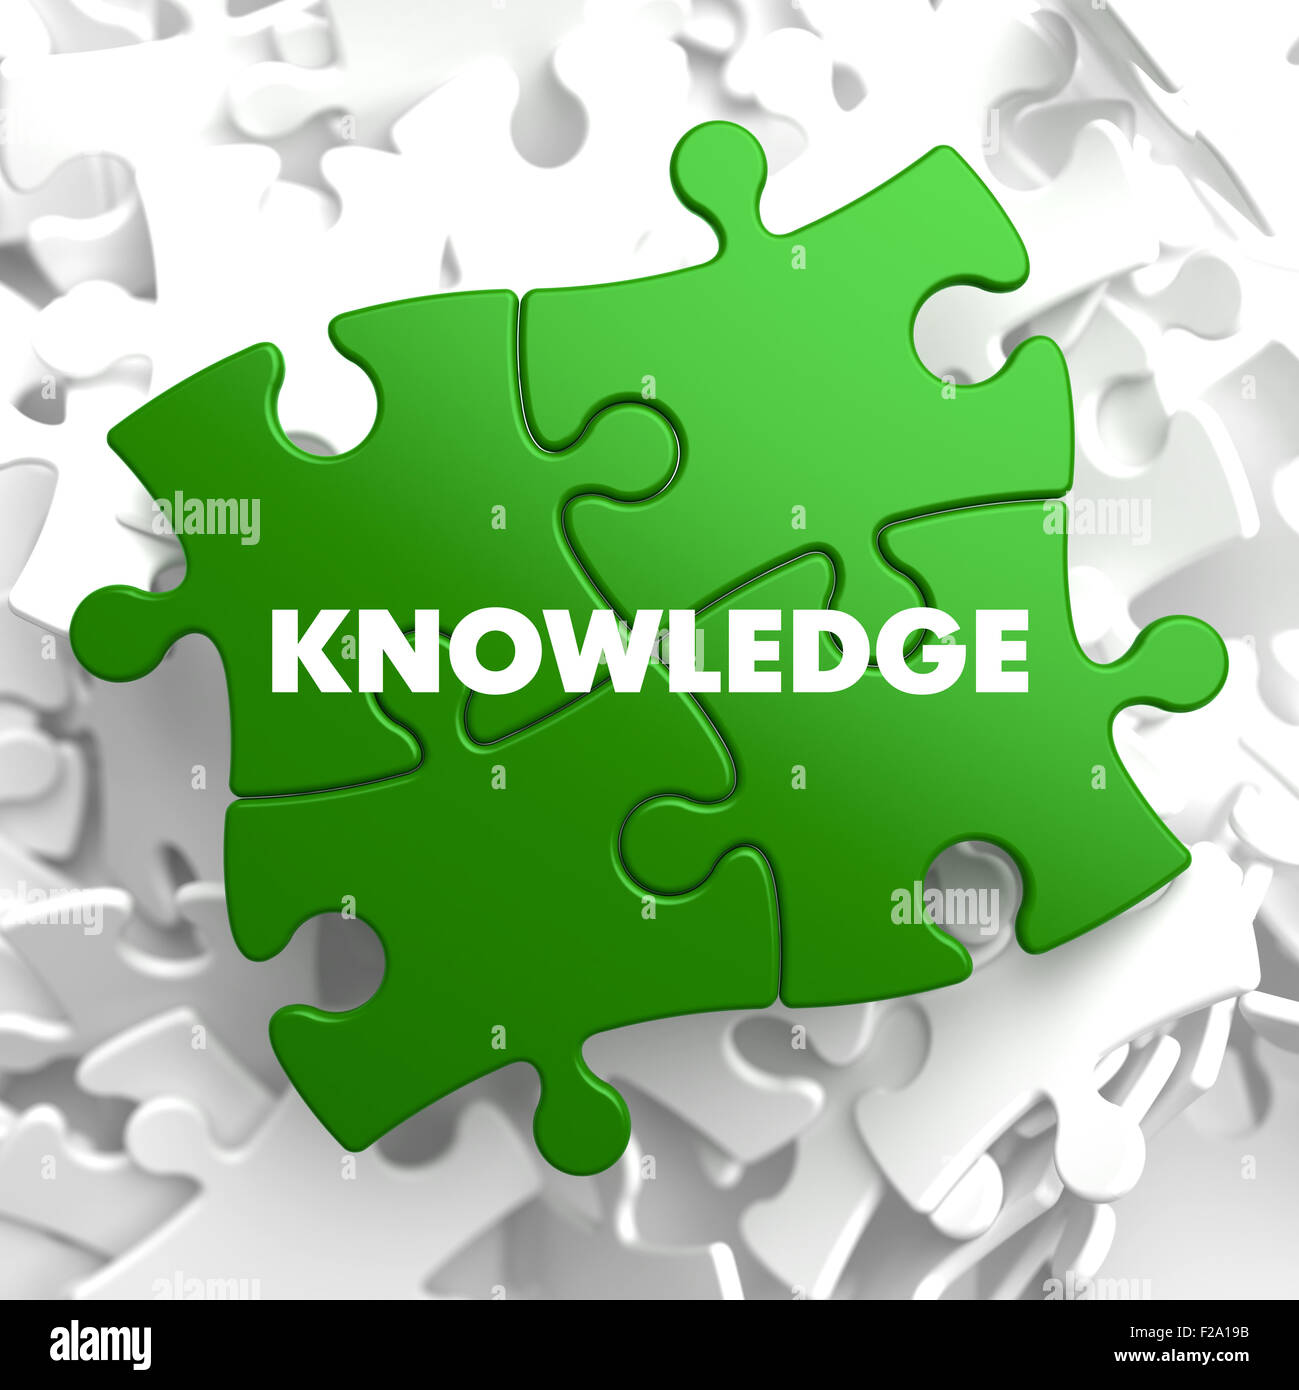 Knowledge on Green Puzzle. Stock Photo